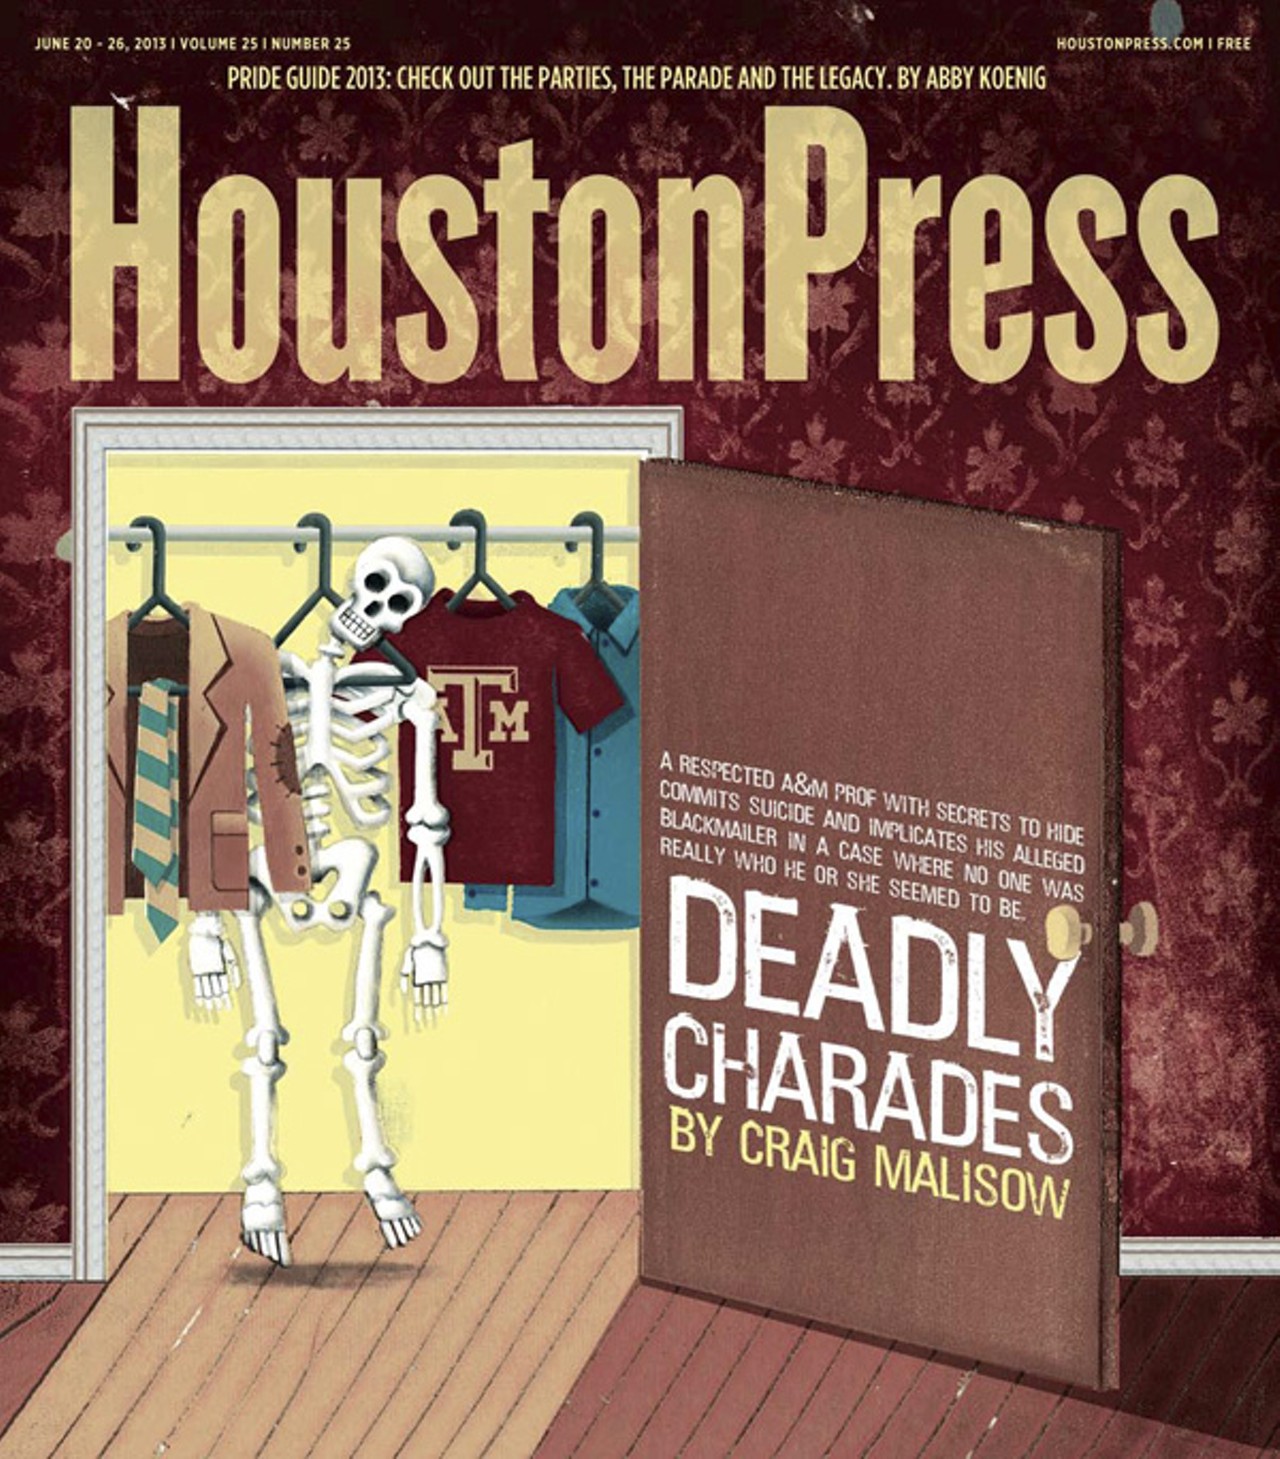 "Deadly Charades," by Craig Malisow in the Houston Press.